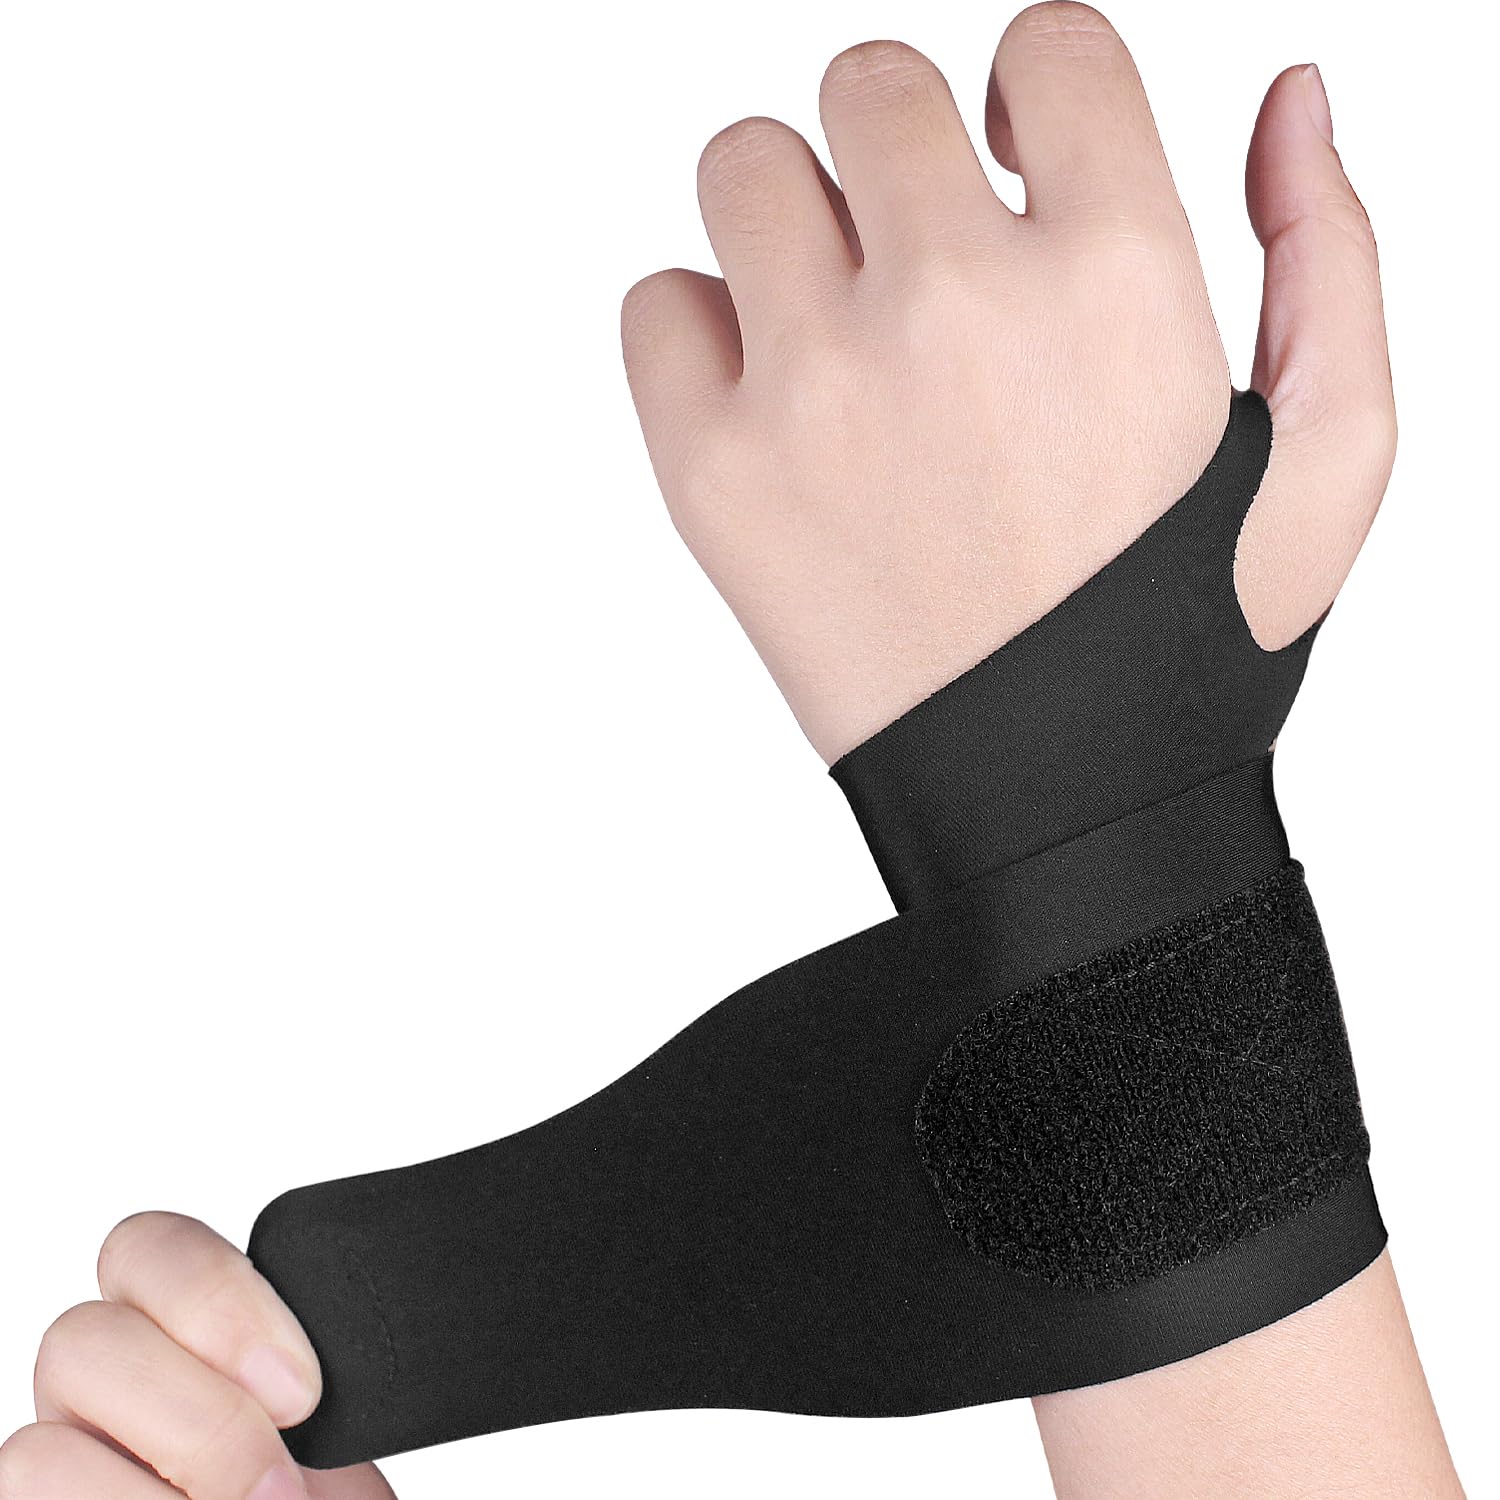 Thin Wrist Brace Support for Carpal Tunnel, Pain Relief, Arthritis, Tendonitis, Elastic Wrist Wraps Right and Left Hands - Compression and Support for Fitness